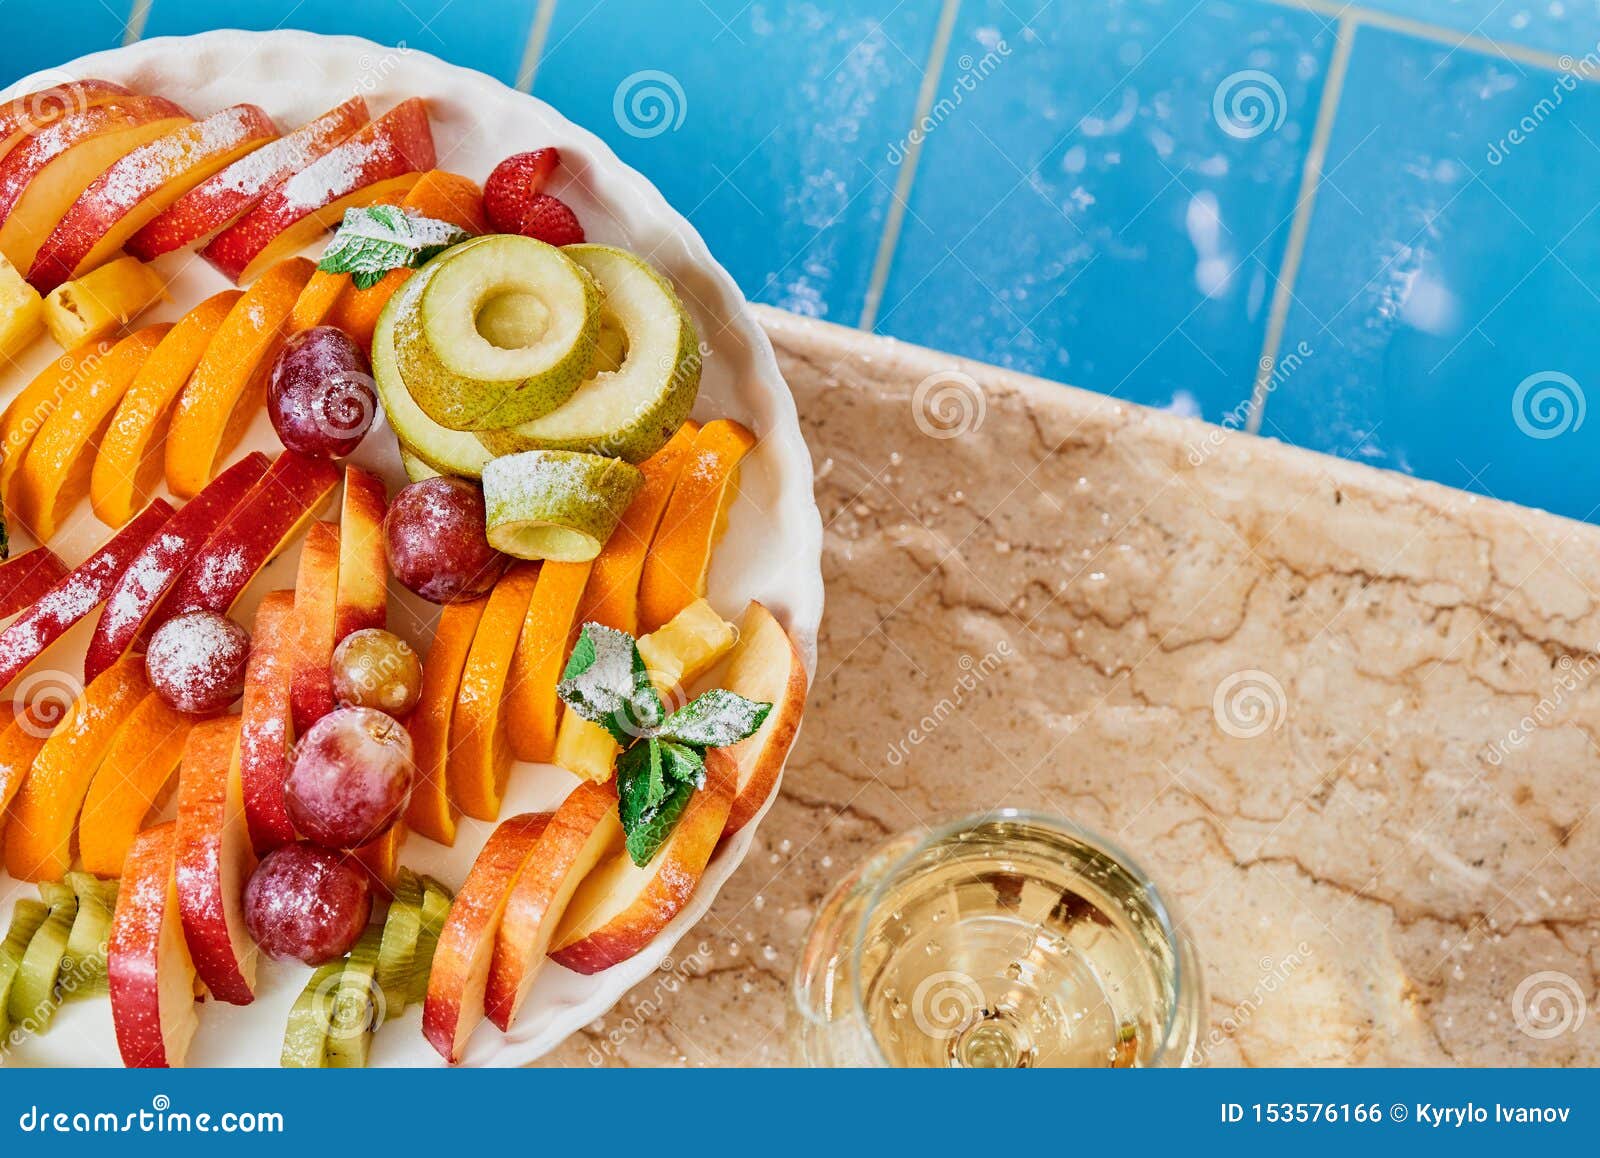 Download Fresh Fruit And A Glass Of White Wine Near The Pool With Blue Tiles Close Up Stock Photo Image Of Plate Lifestyle 153576166